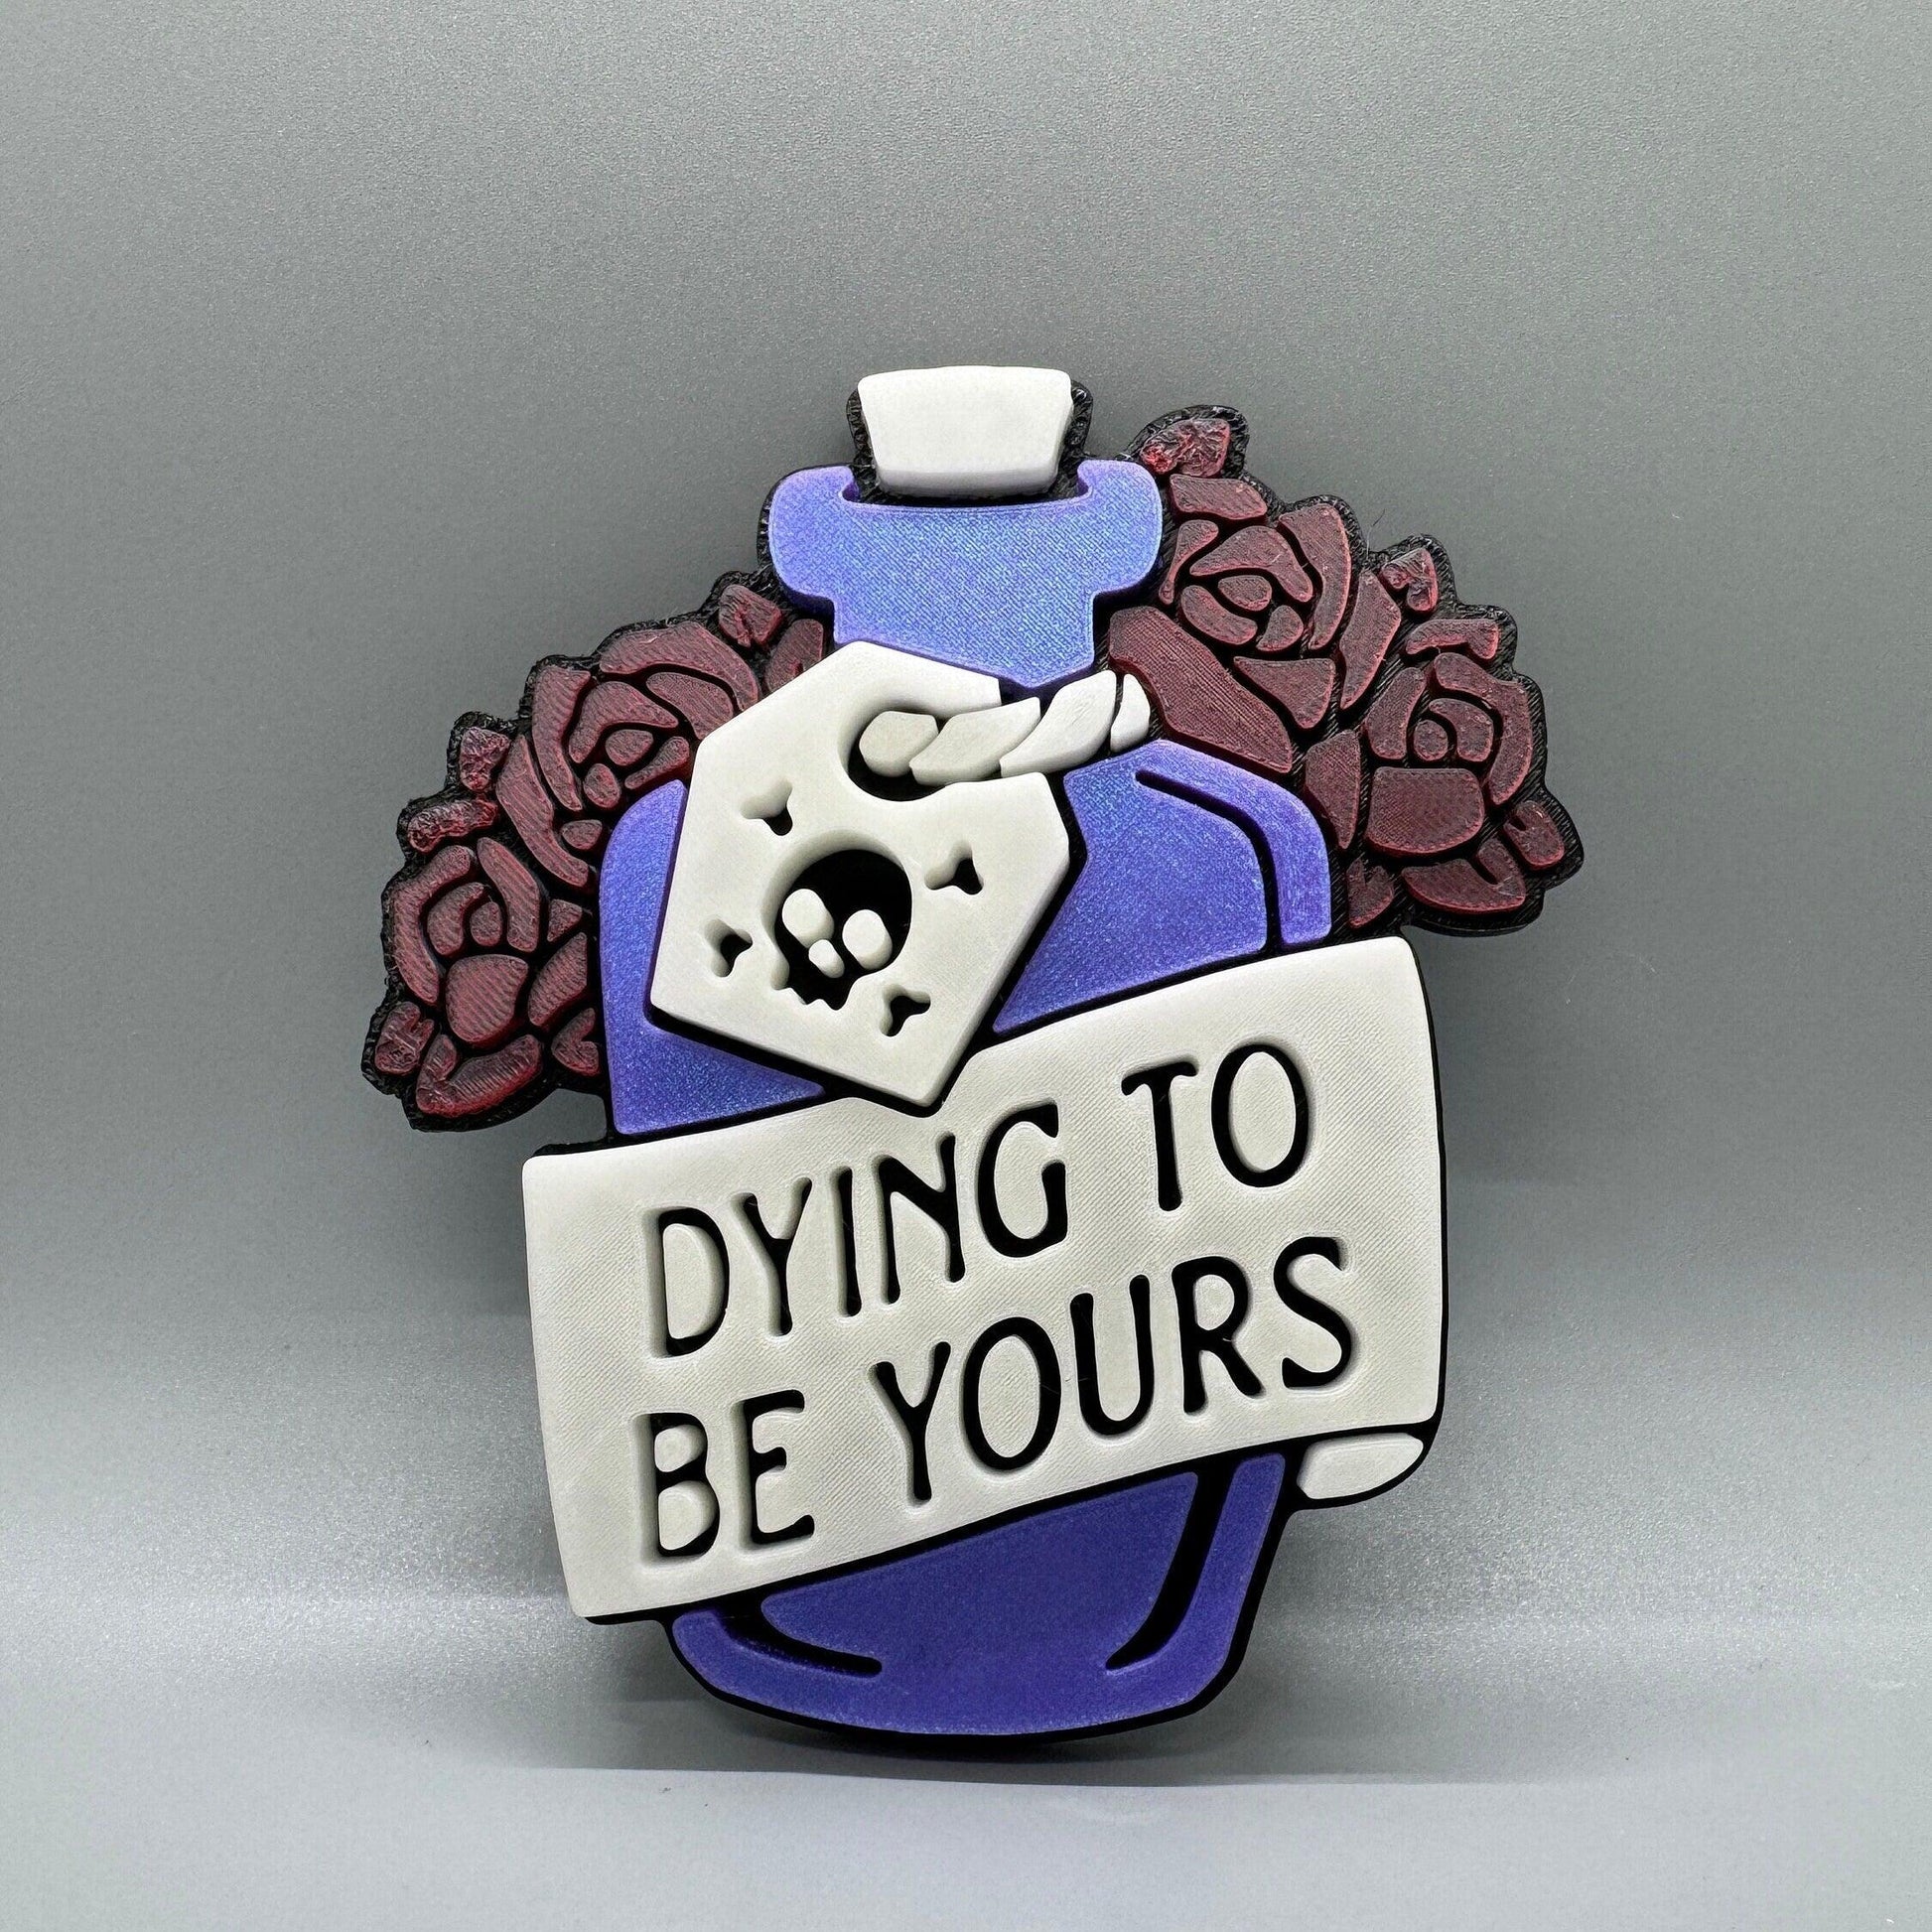 Dying To Be Yours Potion Bottle Wall Hanger | Glow in the Dark - Squee Prints